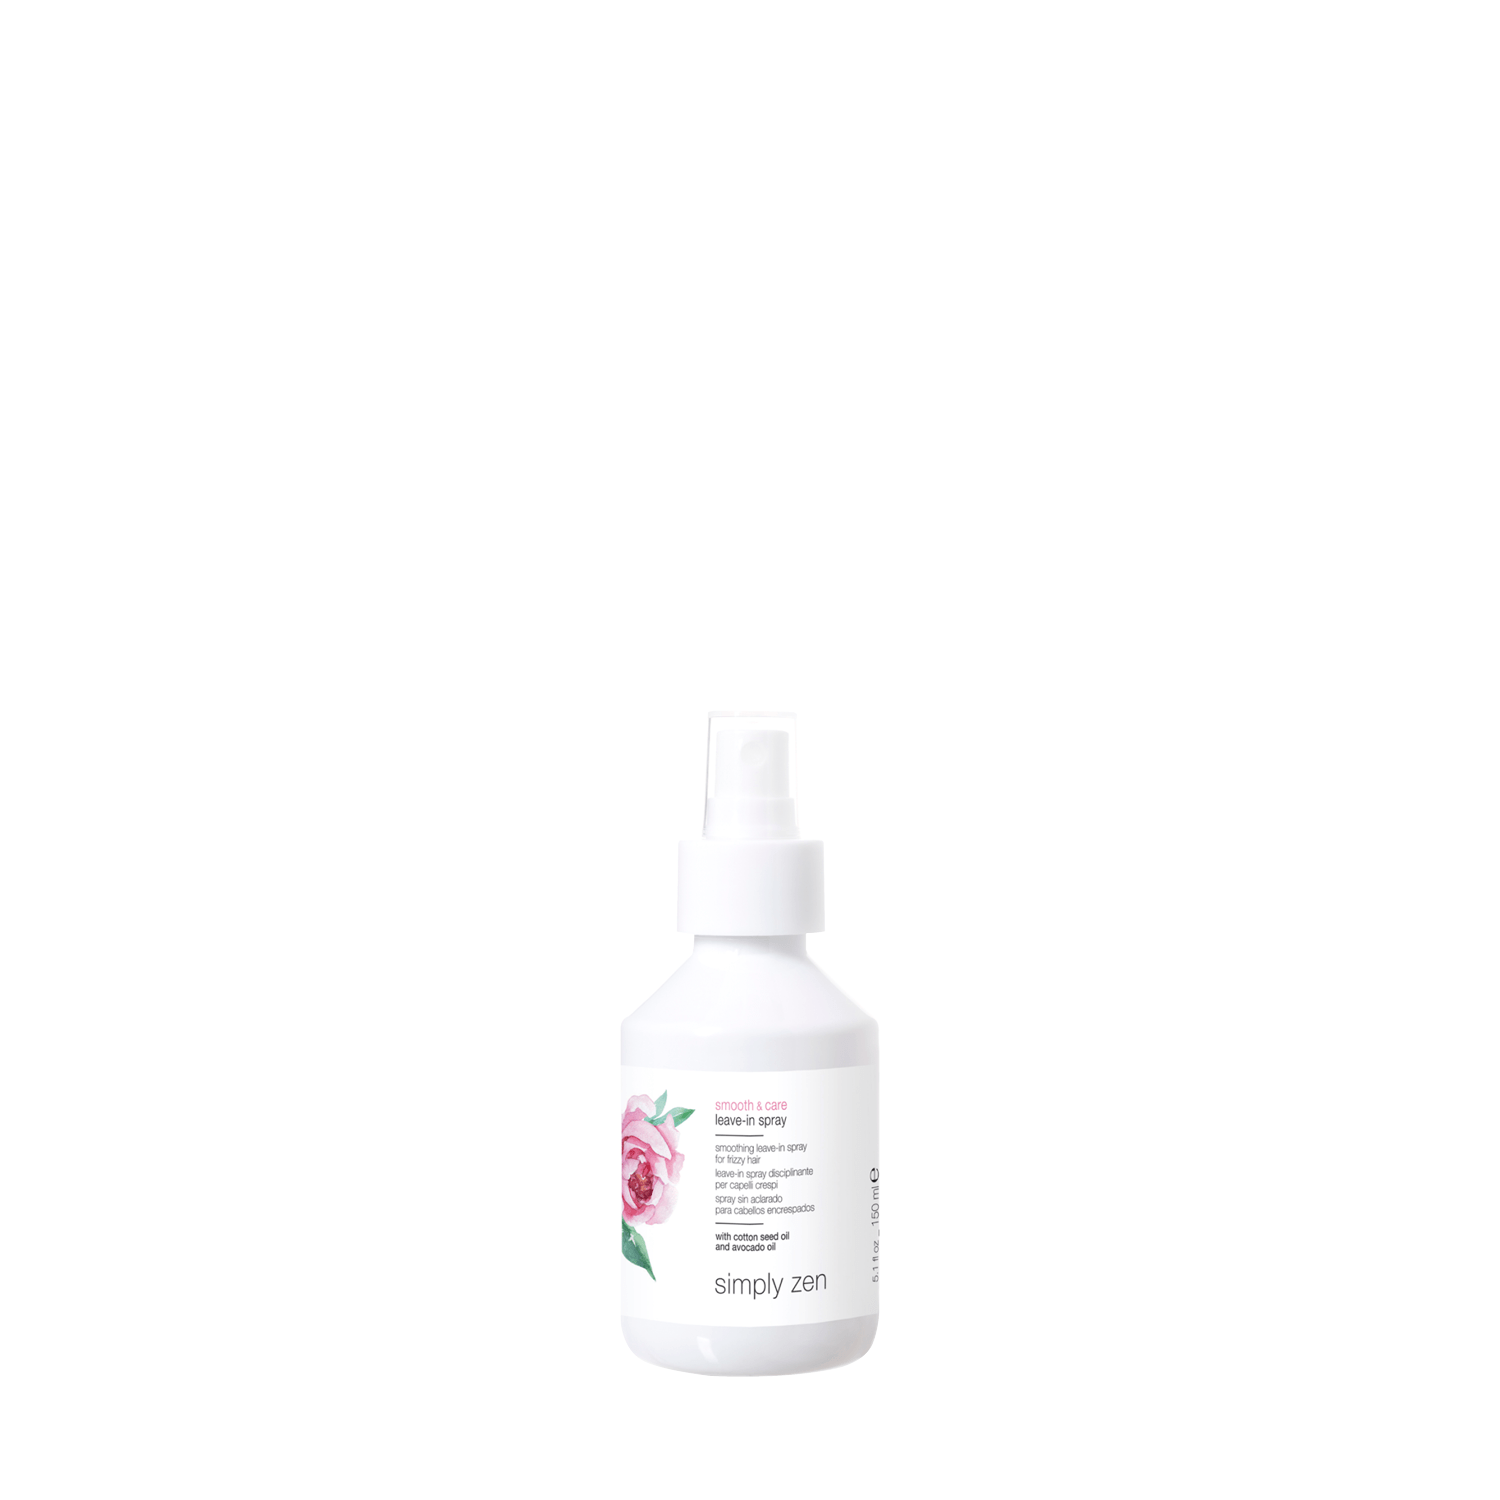 SZ Smooth & Care Leave In Spray 150ml